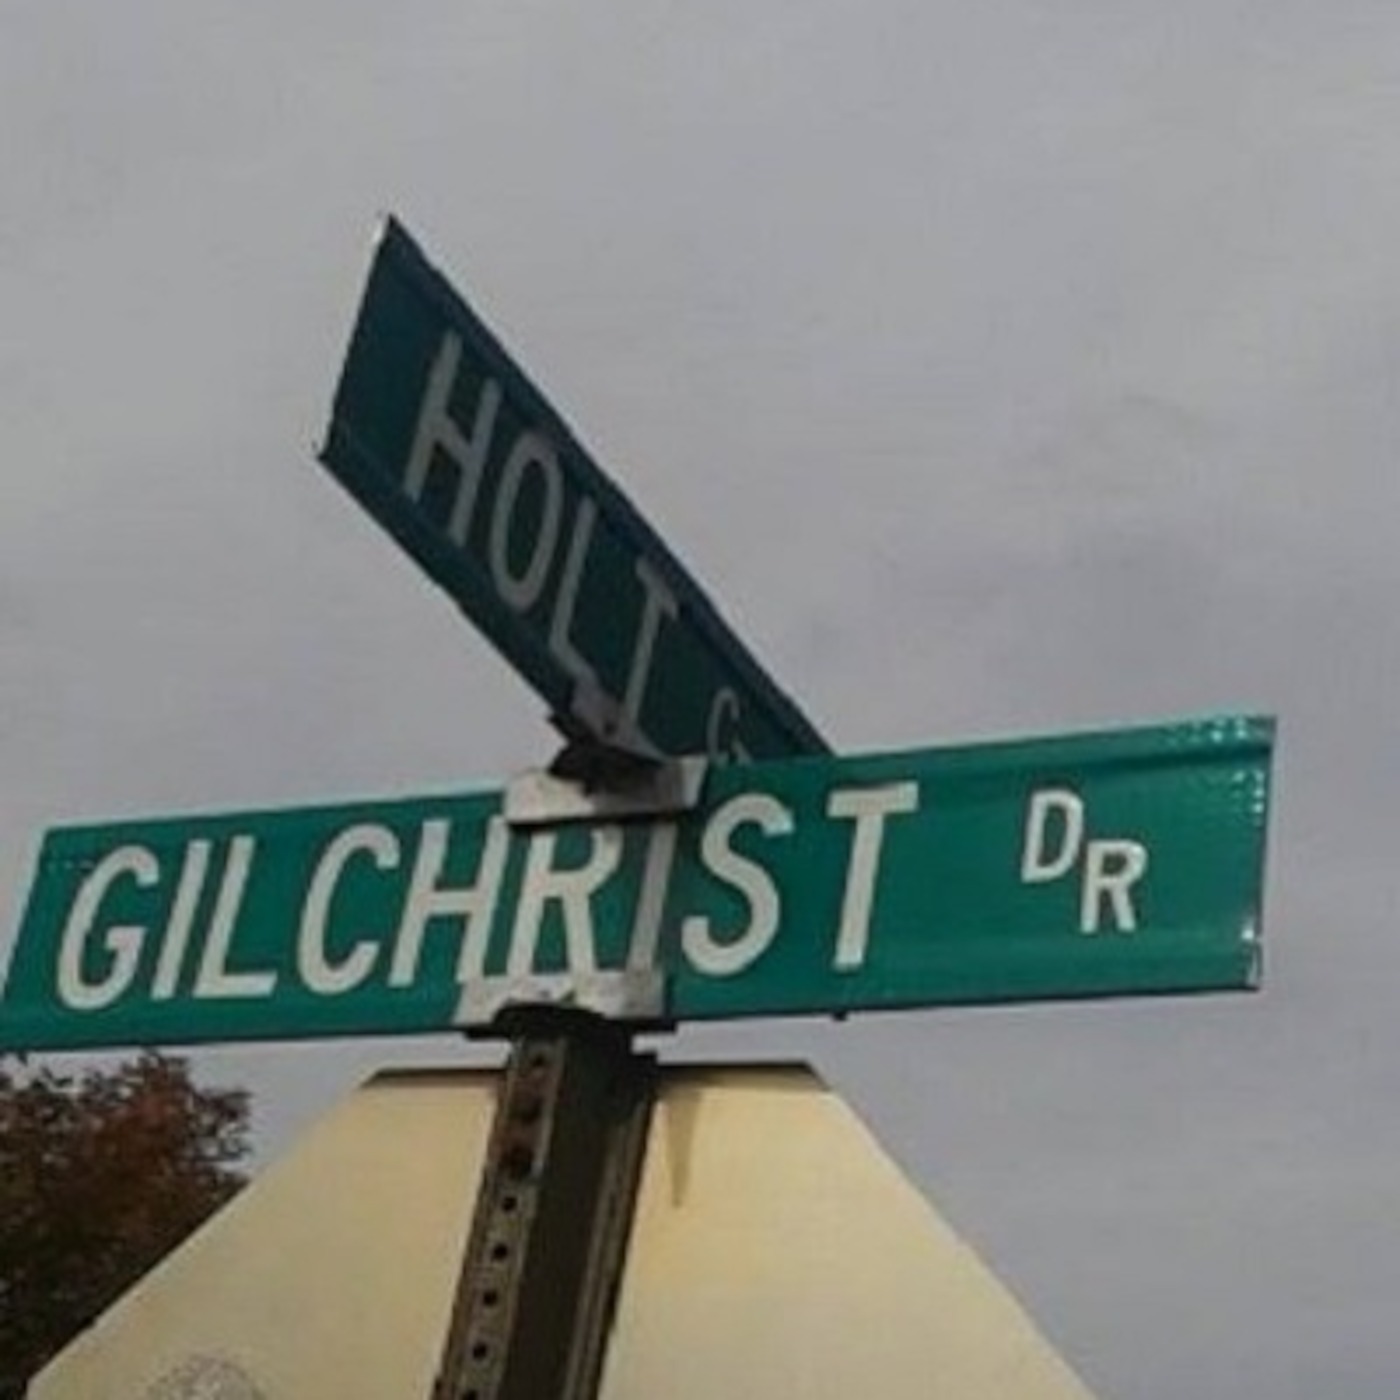 What I learned on Gilchrist Drive